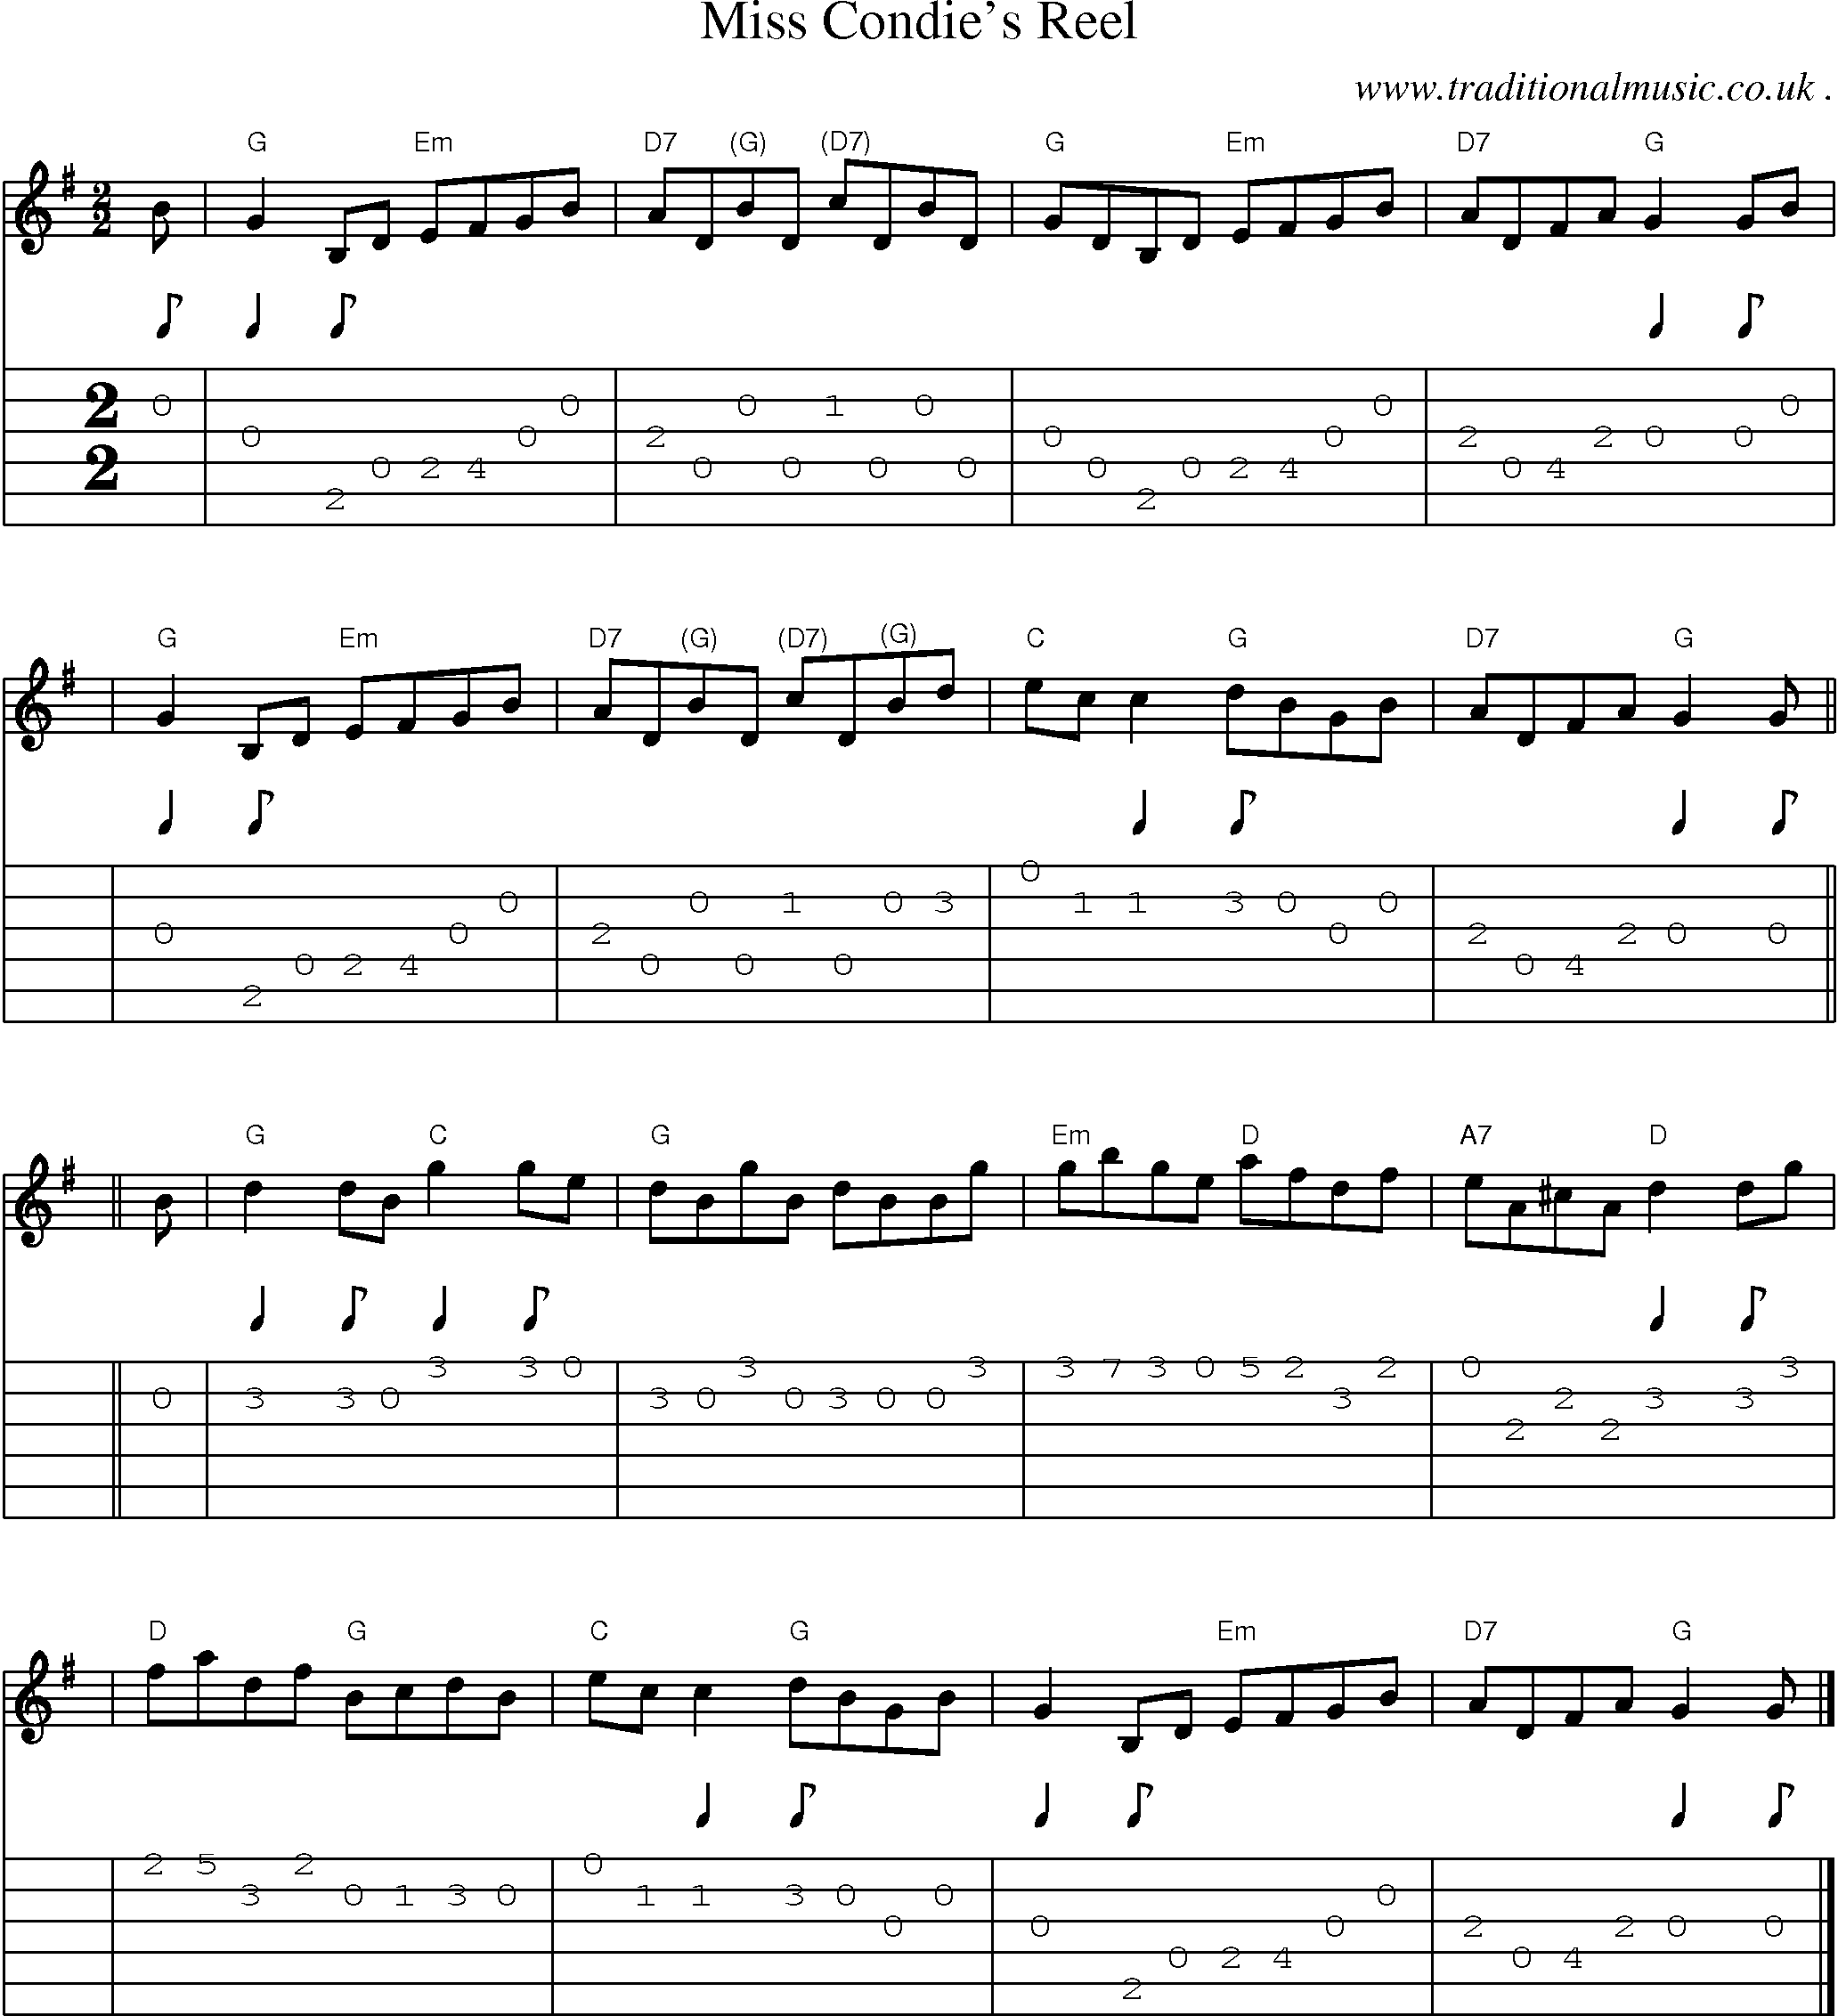 Sheet-music  score, Chords and Guitar Tabs for Miss Condies Reel